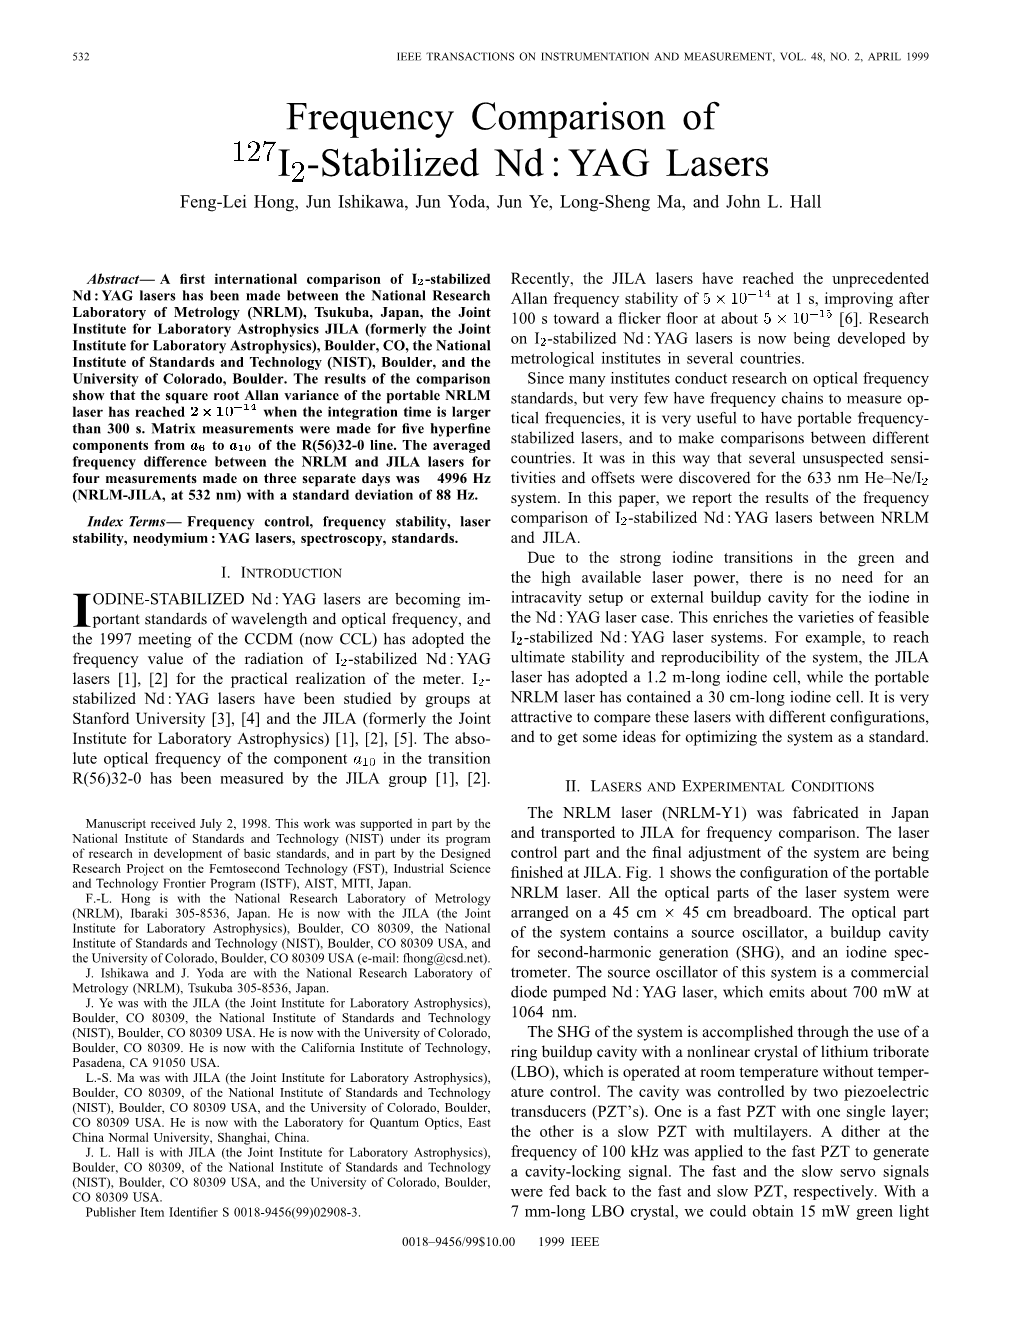 Frequency Comparison of /Sup 127/I-Stabilized Nd : YAG Lasers